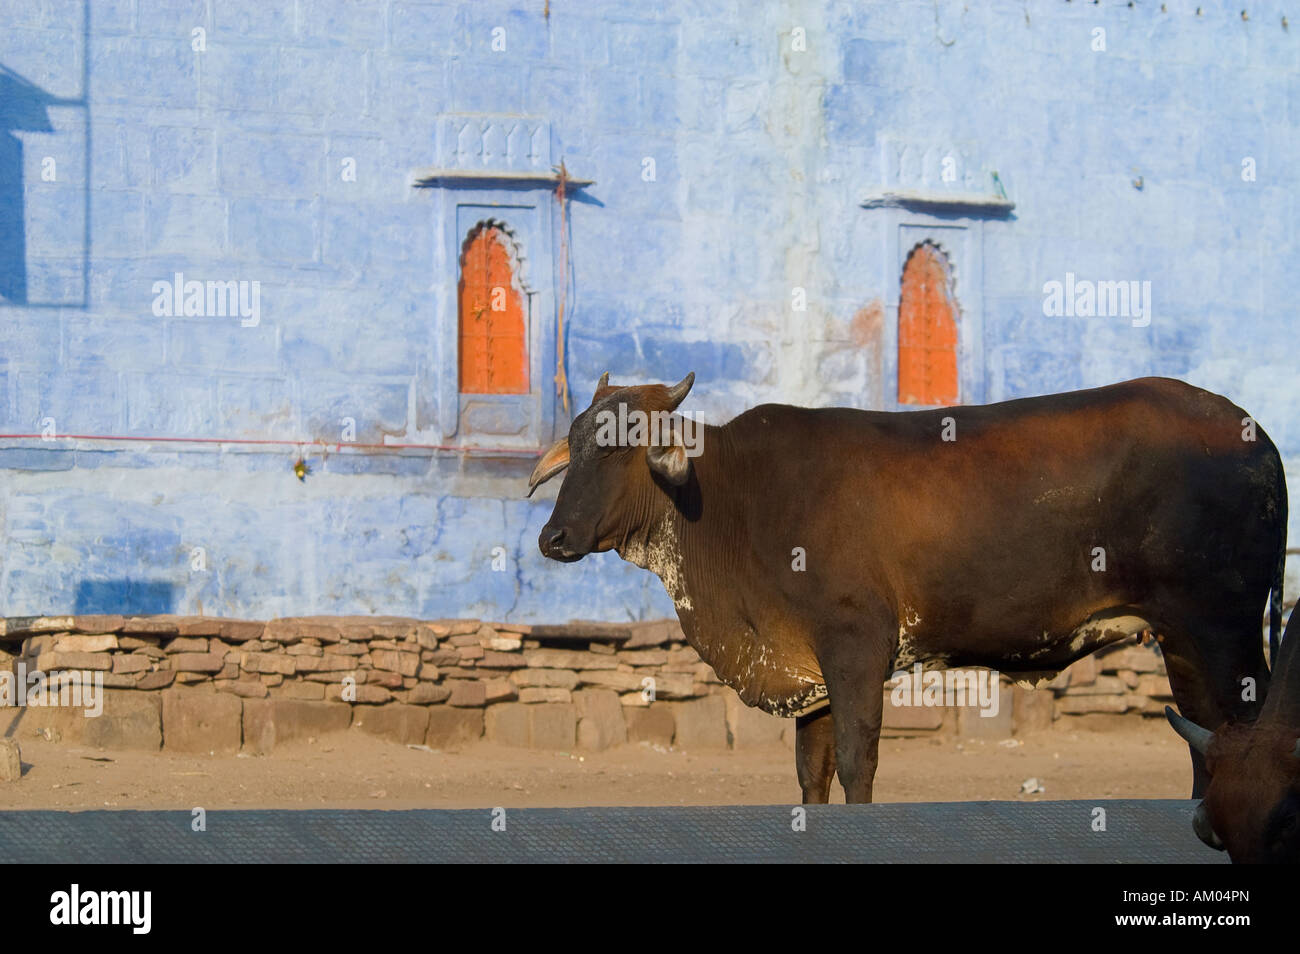 The ubiquitous sacred cow stands outside a classic blue house in Jodhpur, Rajasthan, India. Stock Photo